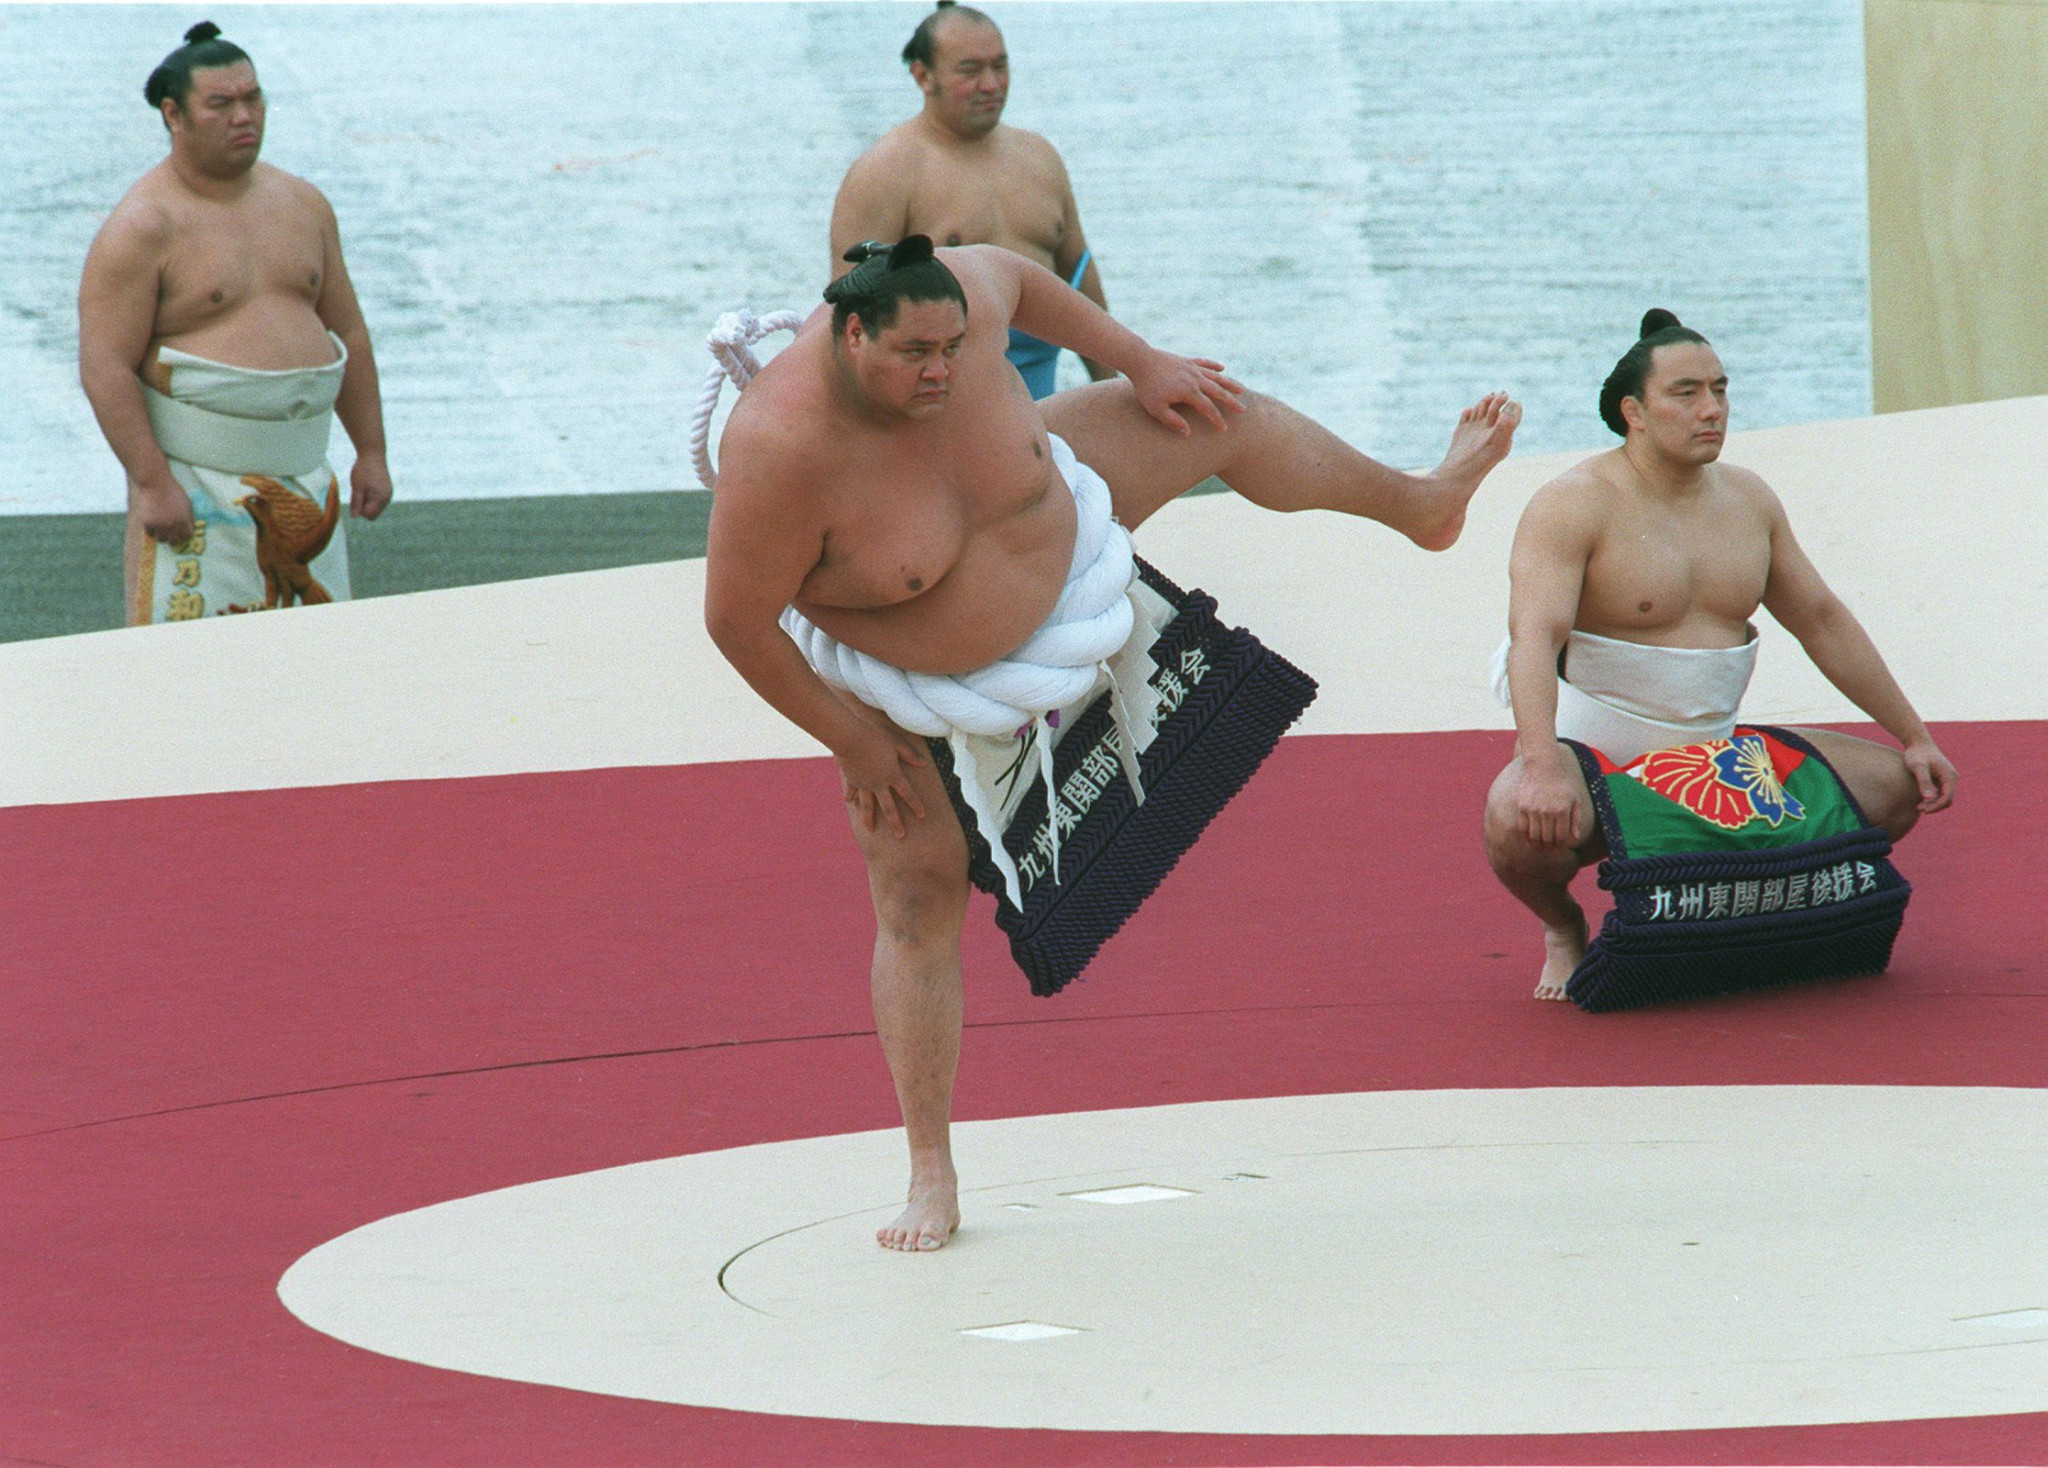 In the light of revelations to come, a traditional Sumo ritual to purify the Olympic arena had unintentional irony ©Getty Images